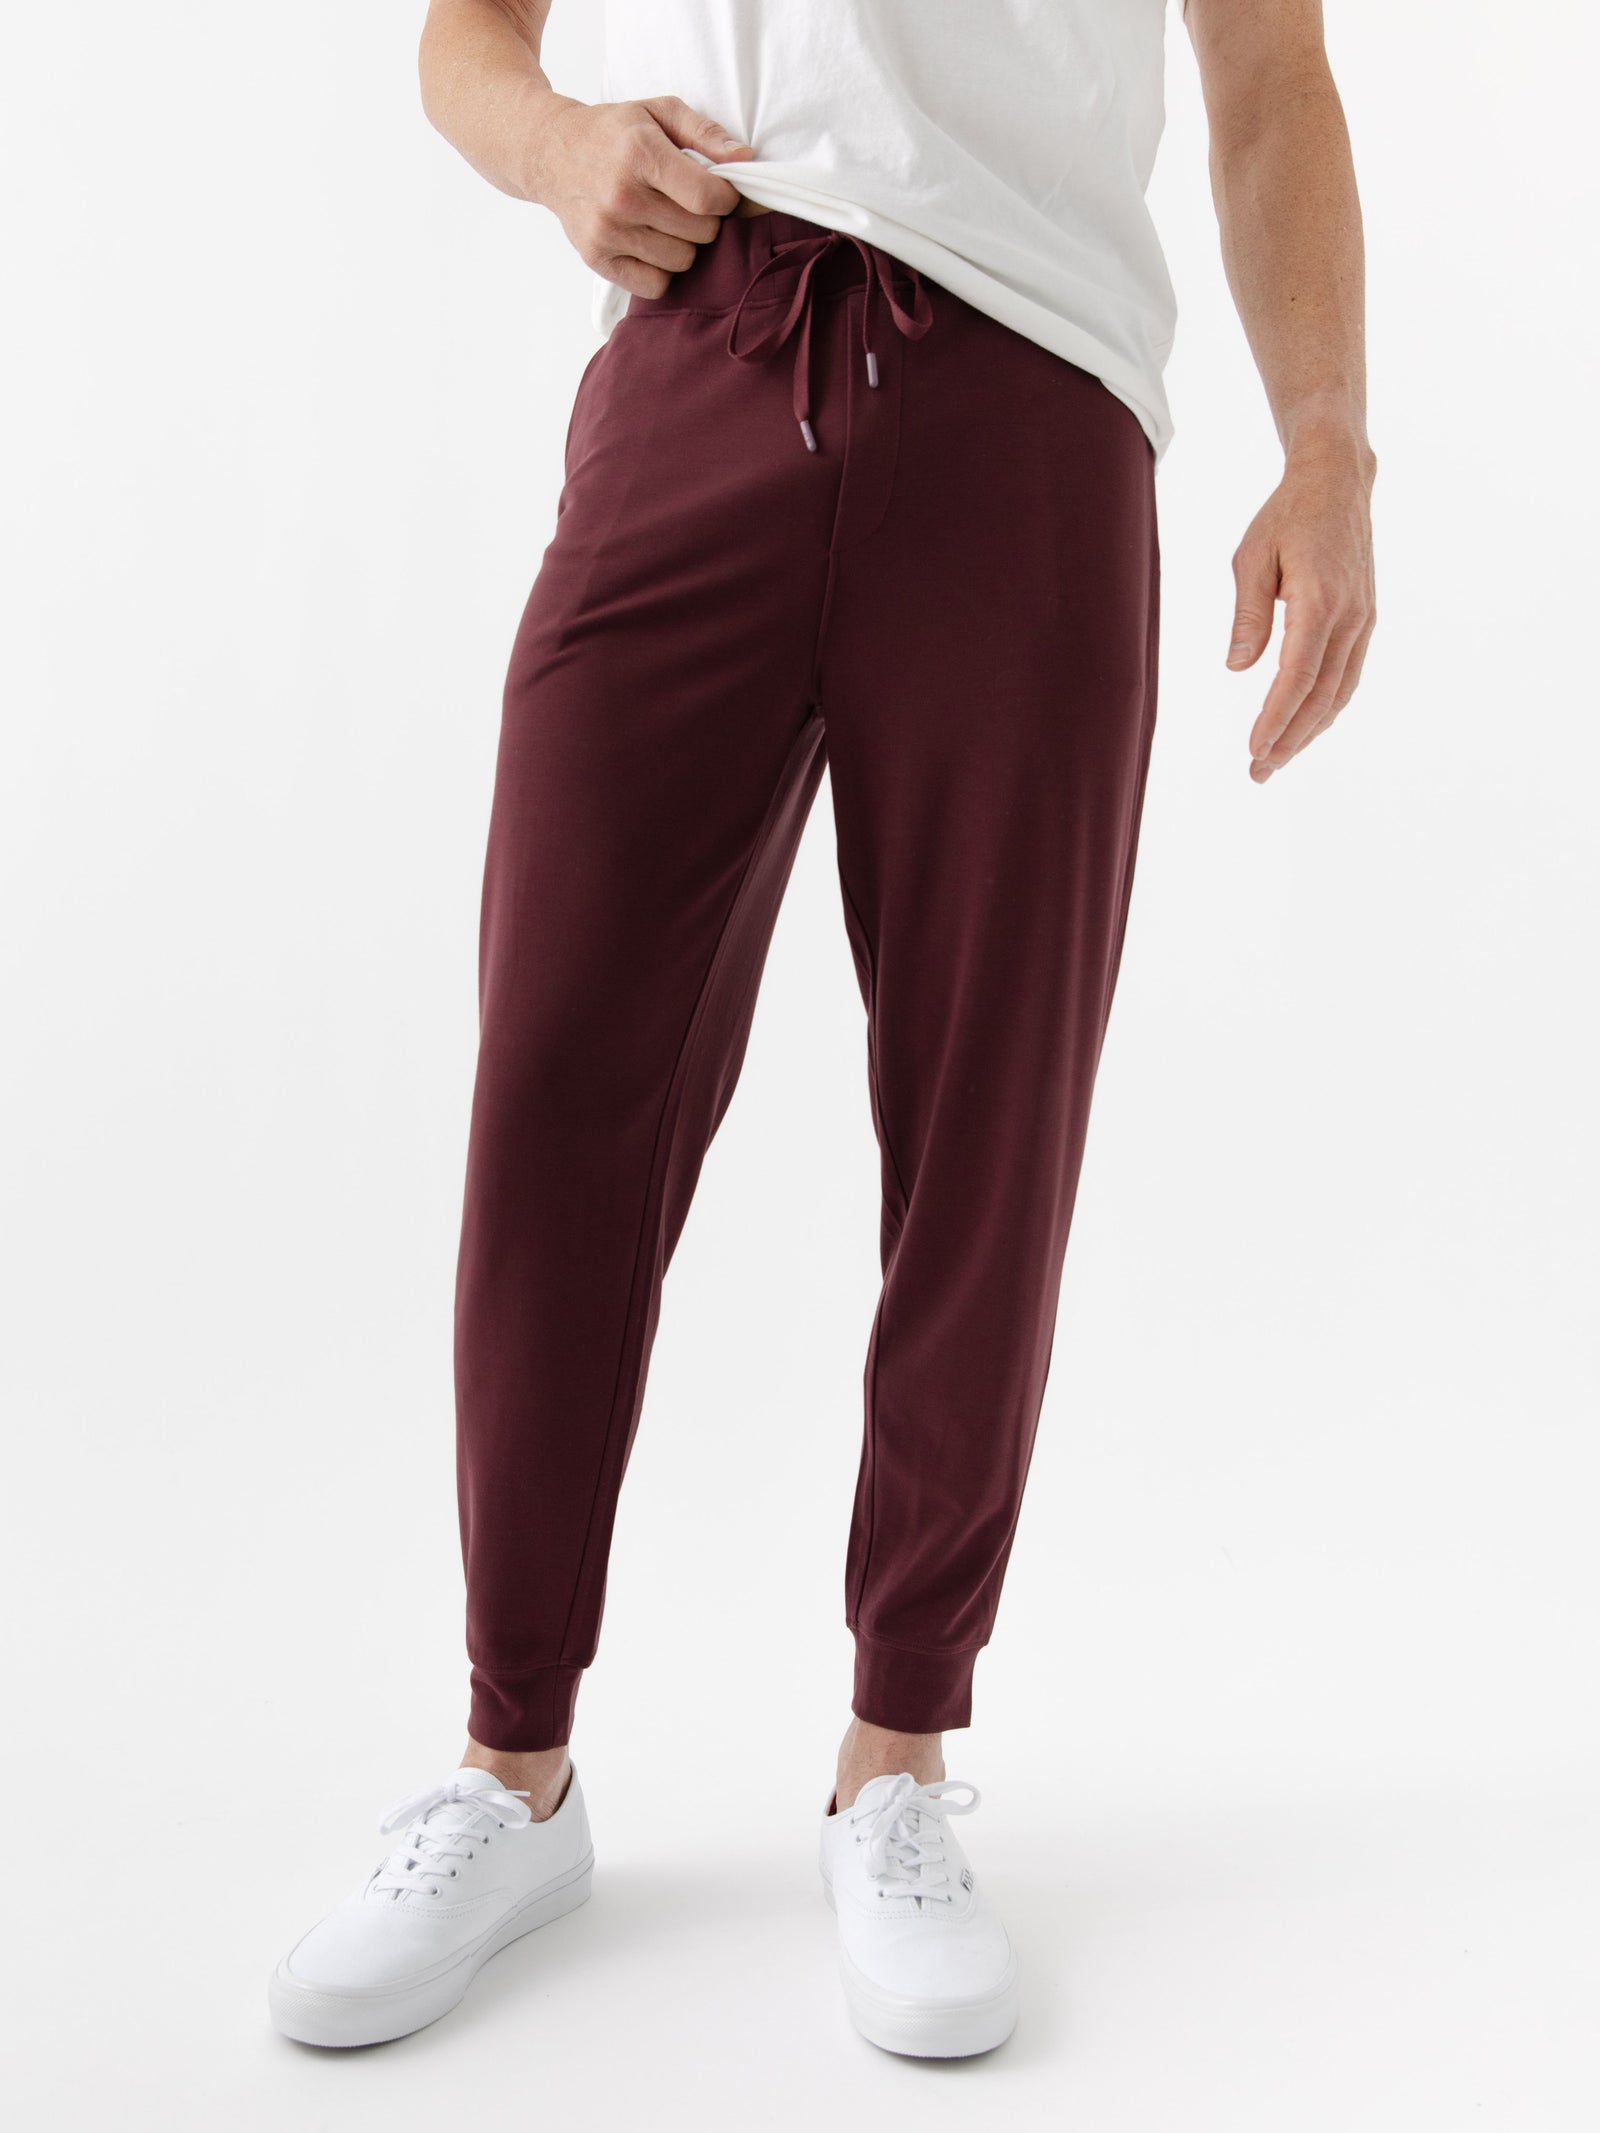 Burgundy/Light GreyMen's Bamboo Jogger Set. There is a man wearing the jogger set. He is standing in a well lit room in a home.